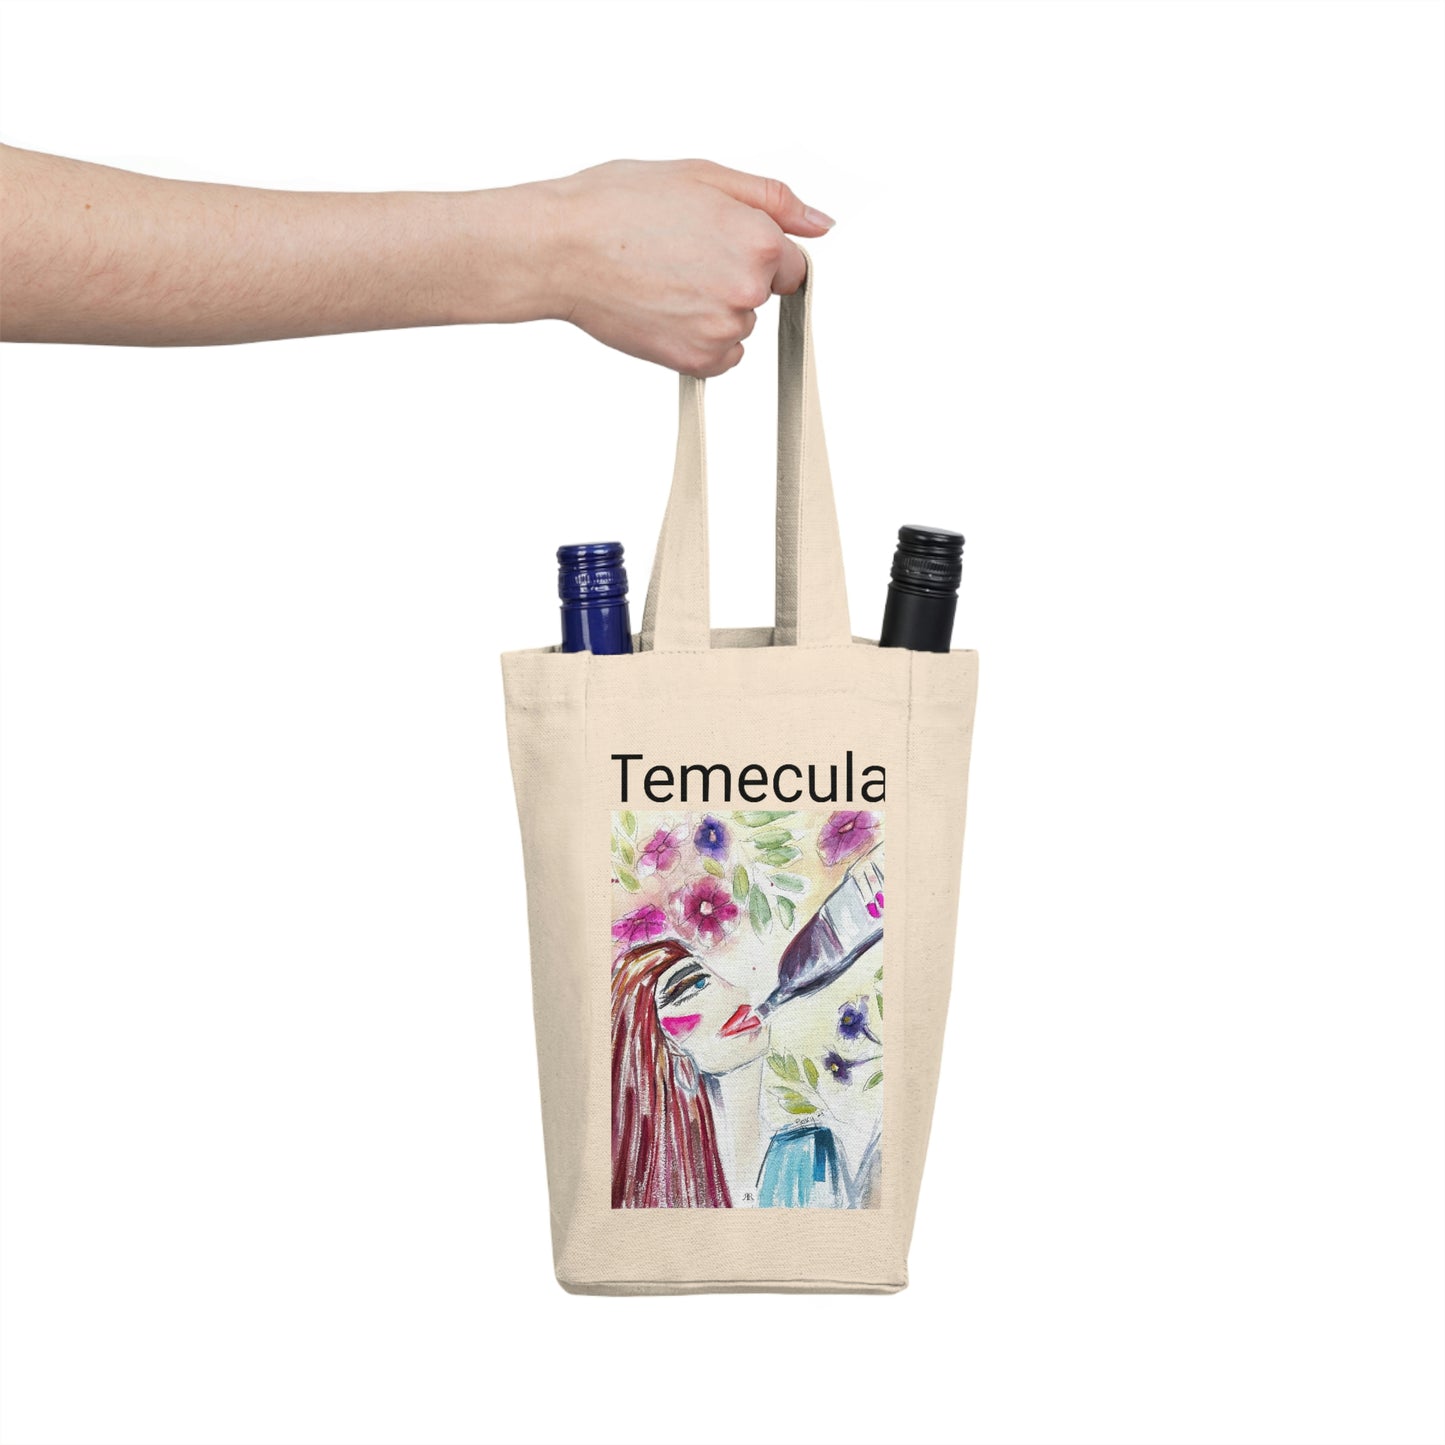 Double Wine Tote Bag featuring "That Kind of Day" painting